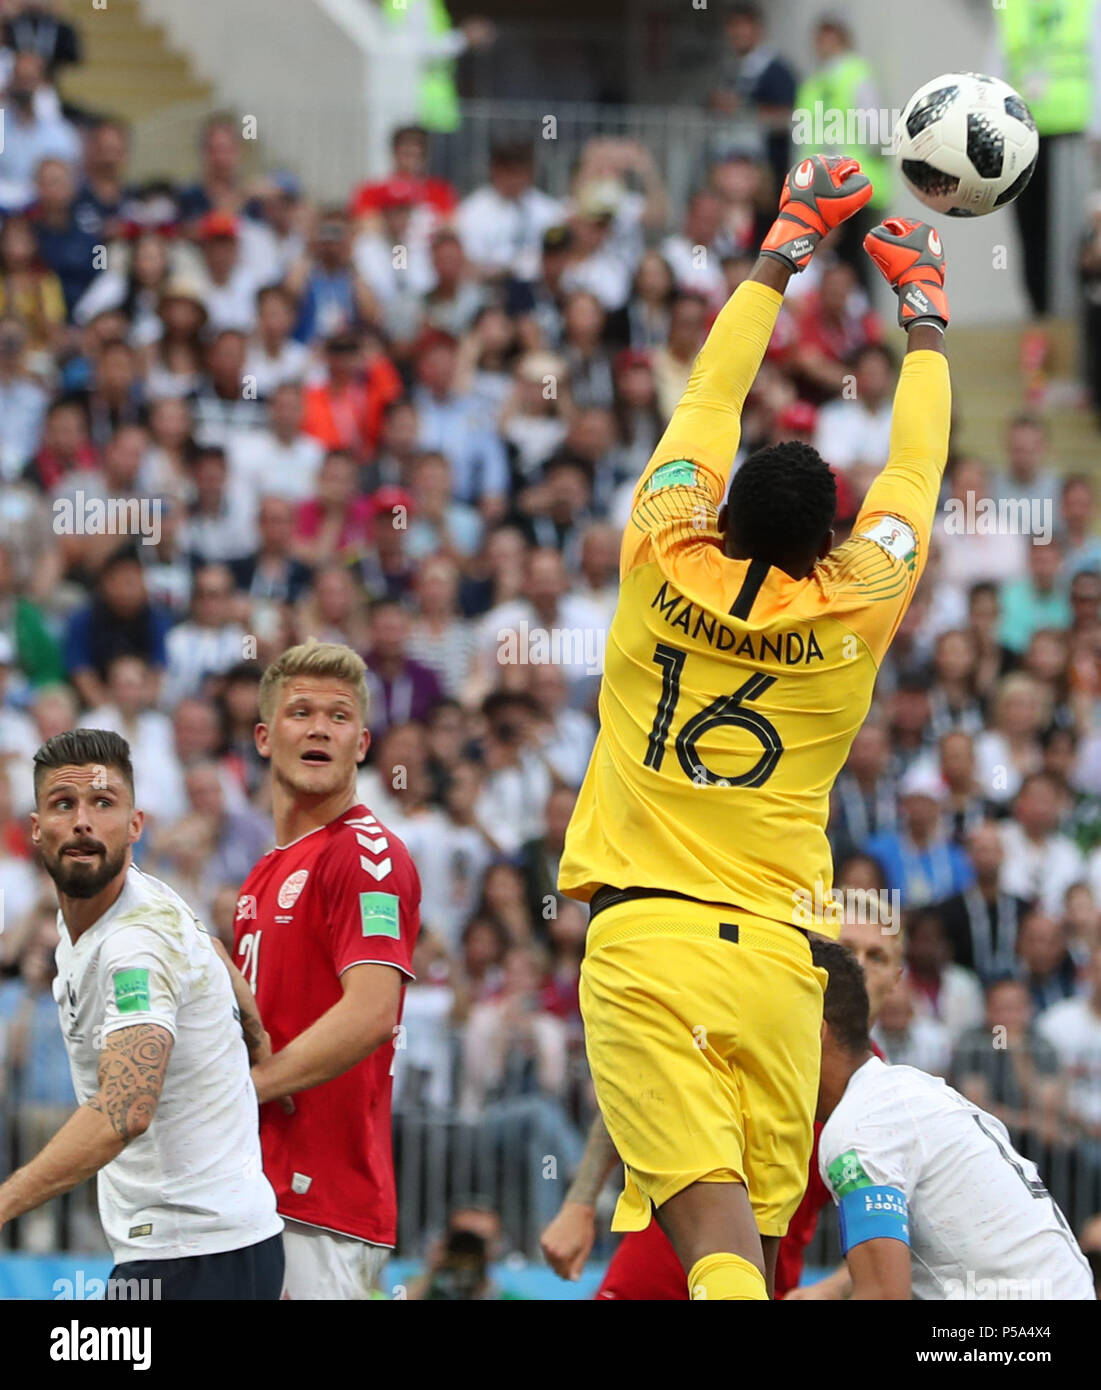 Moscow, Russia. 26th June, 2018. France's goalkeeper Steve Mandanda defends during the 2018 FIFA World Cup Group C match between Denmark and France in Moscow, Russia, June 26, 2018. The match ended in a 0-0 draw. France and Denmark advanced to the round of 16. Credit: Cao Can/Xinhua/Alamy Live News Stock Photo